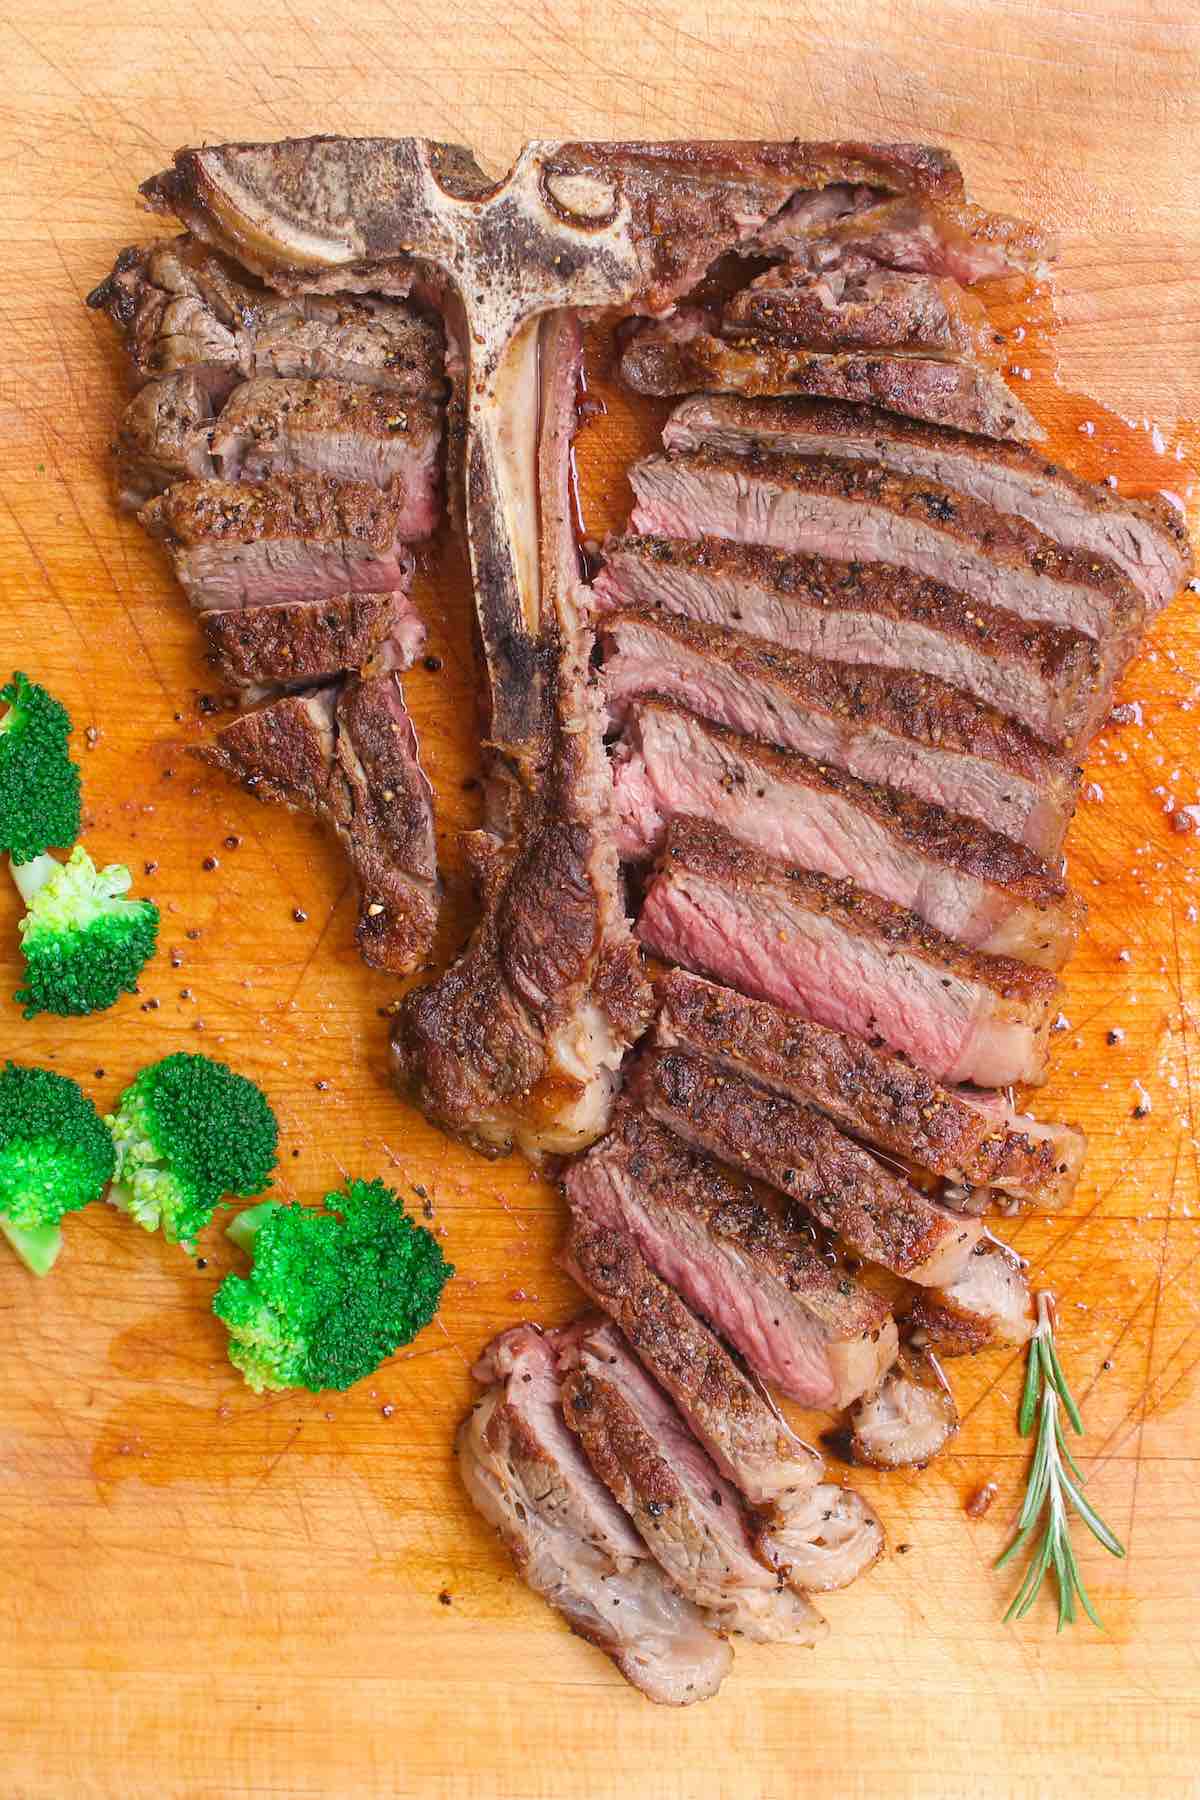 T-bone steak cooked to the USDA recommended level of 145°F and sliced showing pale pink color